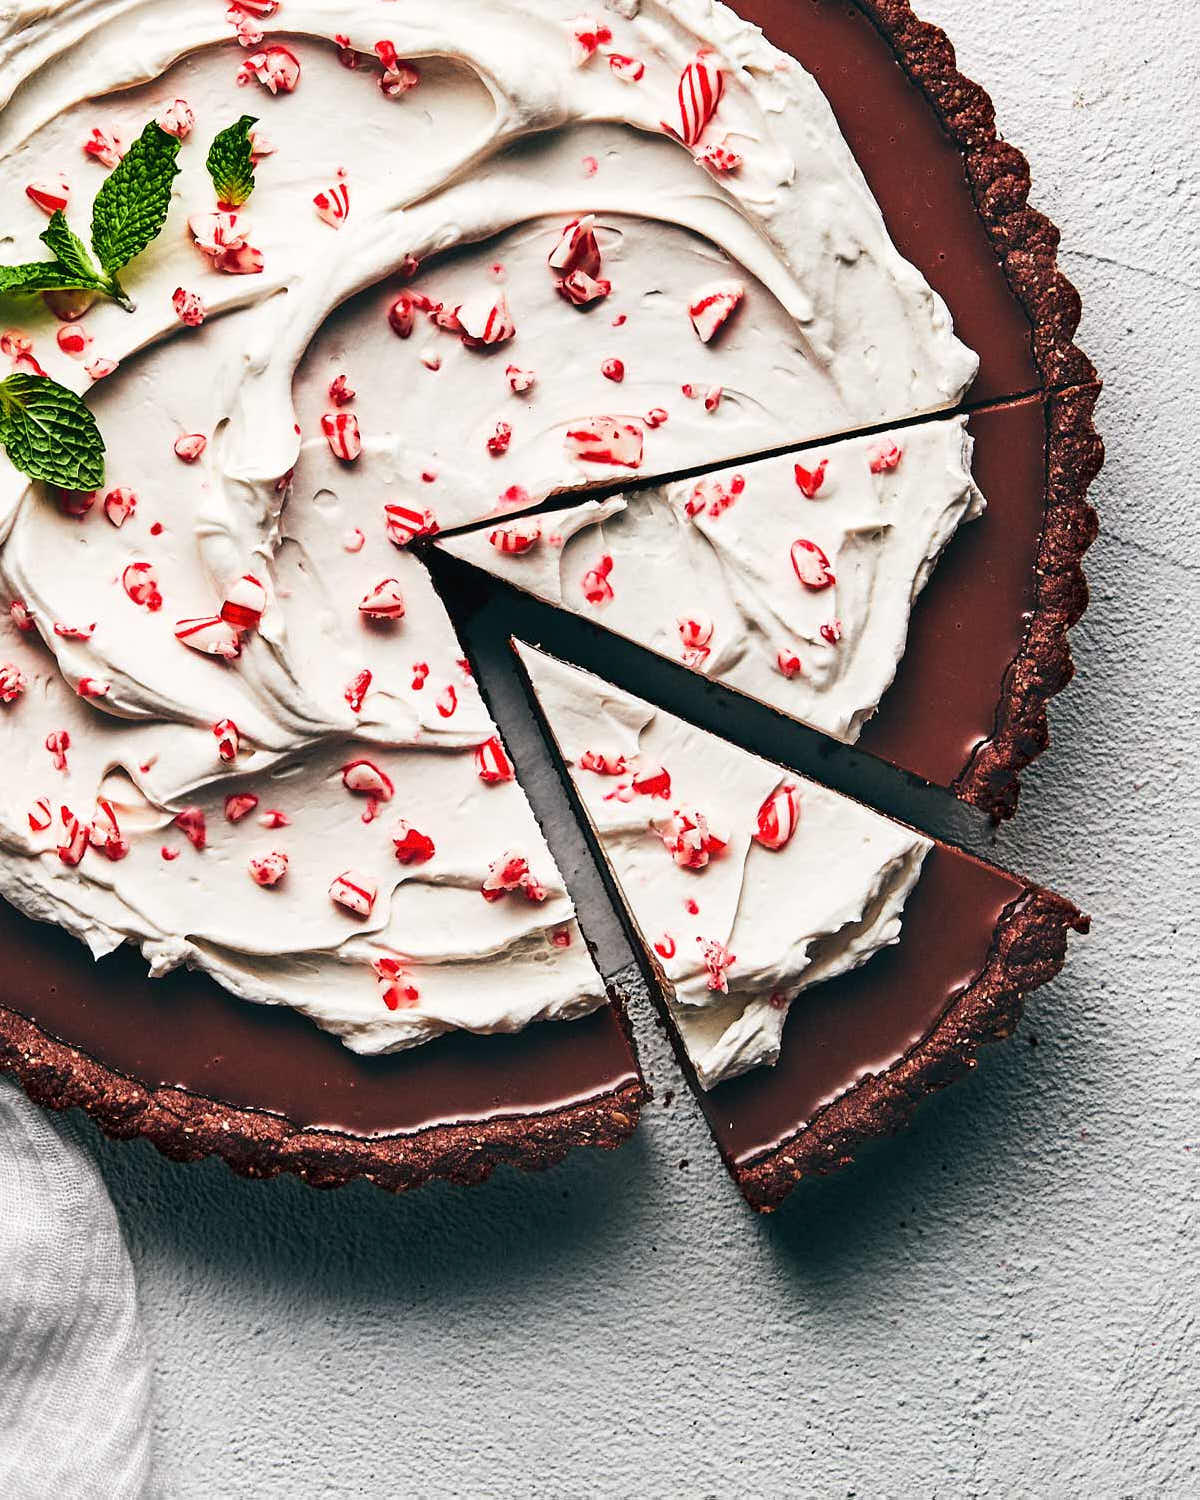 Sliced chocolate peppermint tart ready to be enjoyed